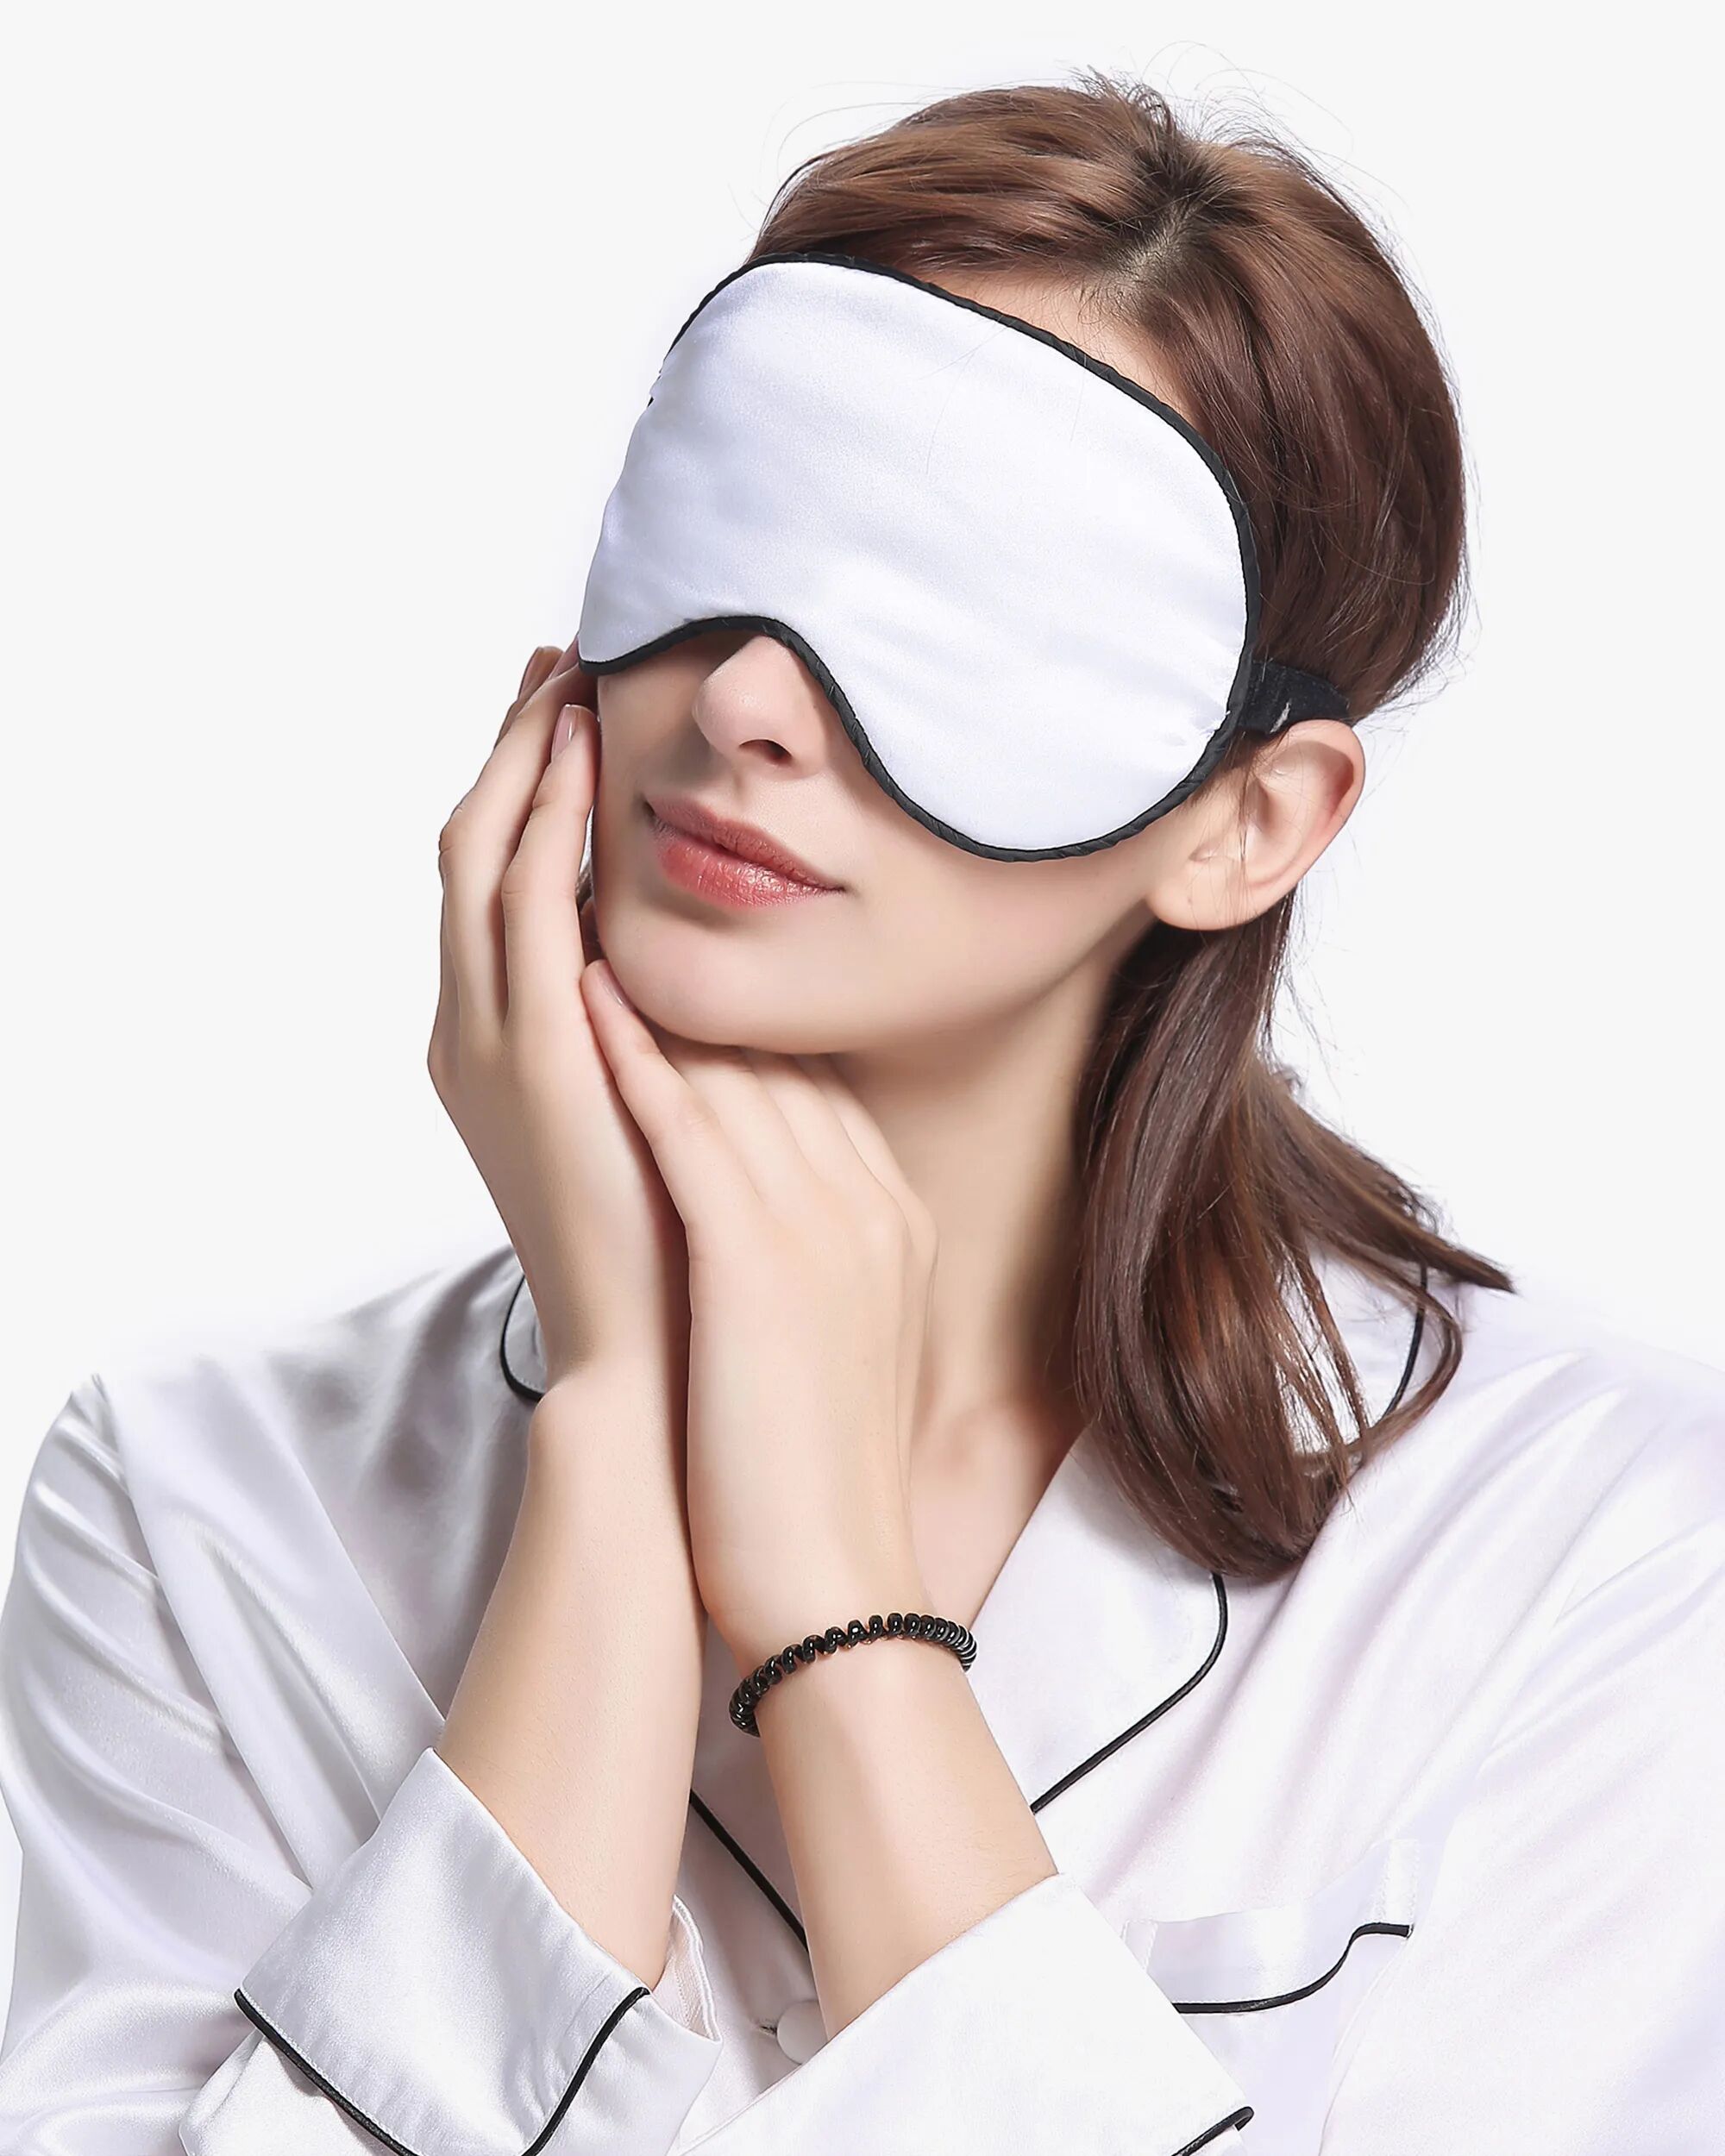 LILYSILK Best Eye Mask Silk Women White US Comfortable Elastic Band Light And Soft Naturally Hypoallergenic